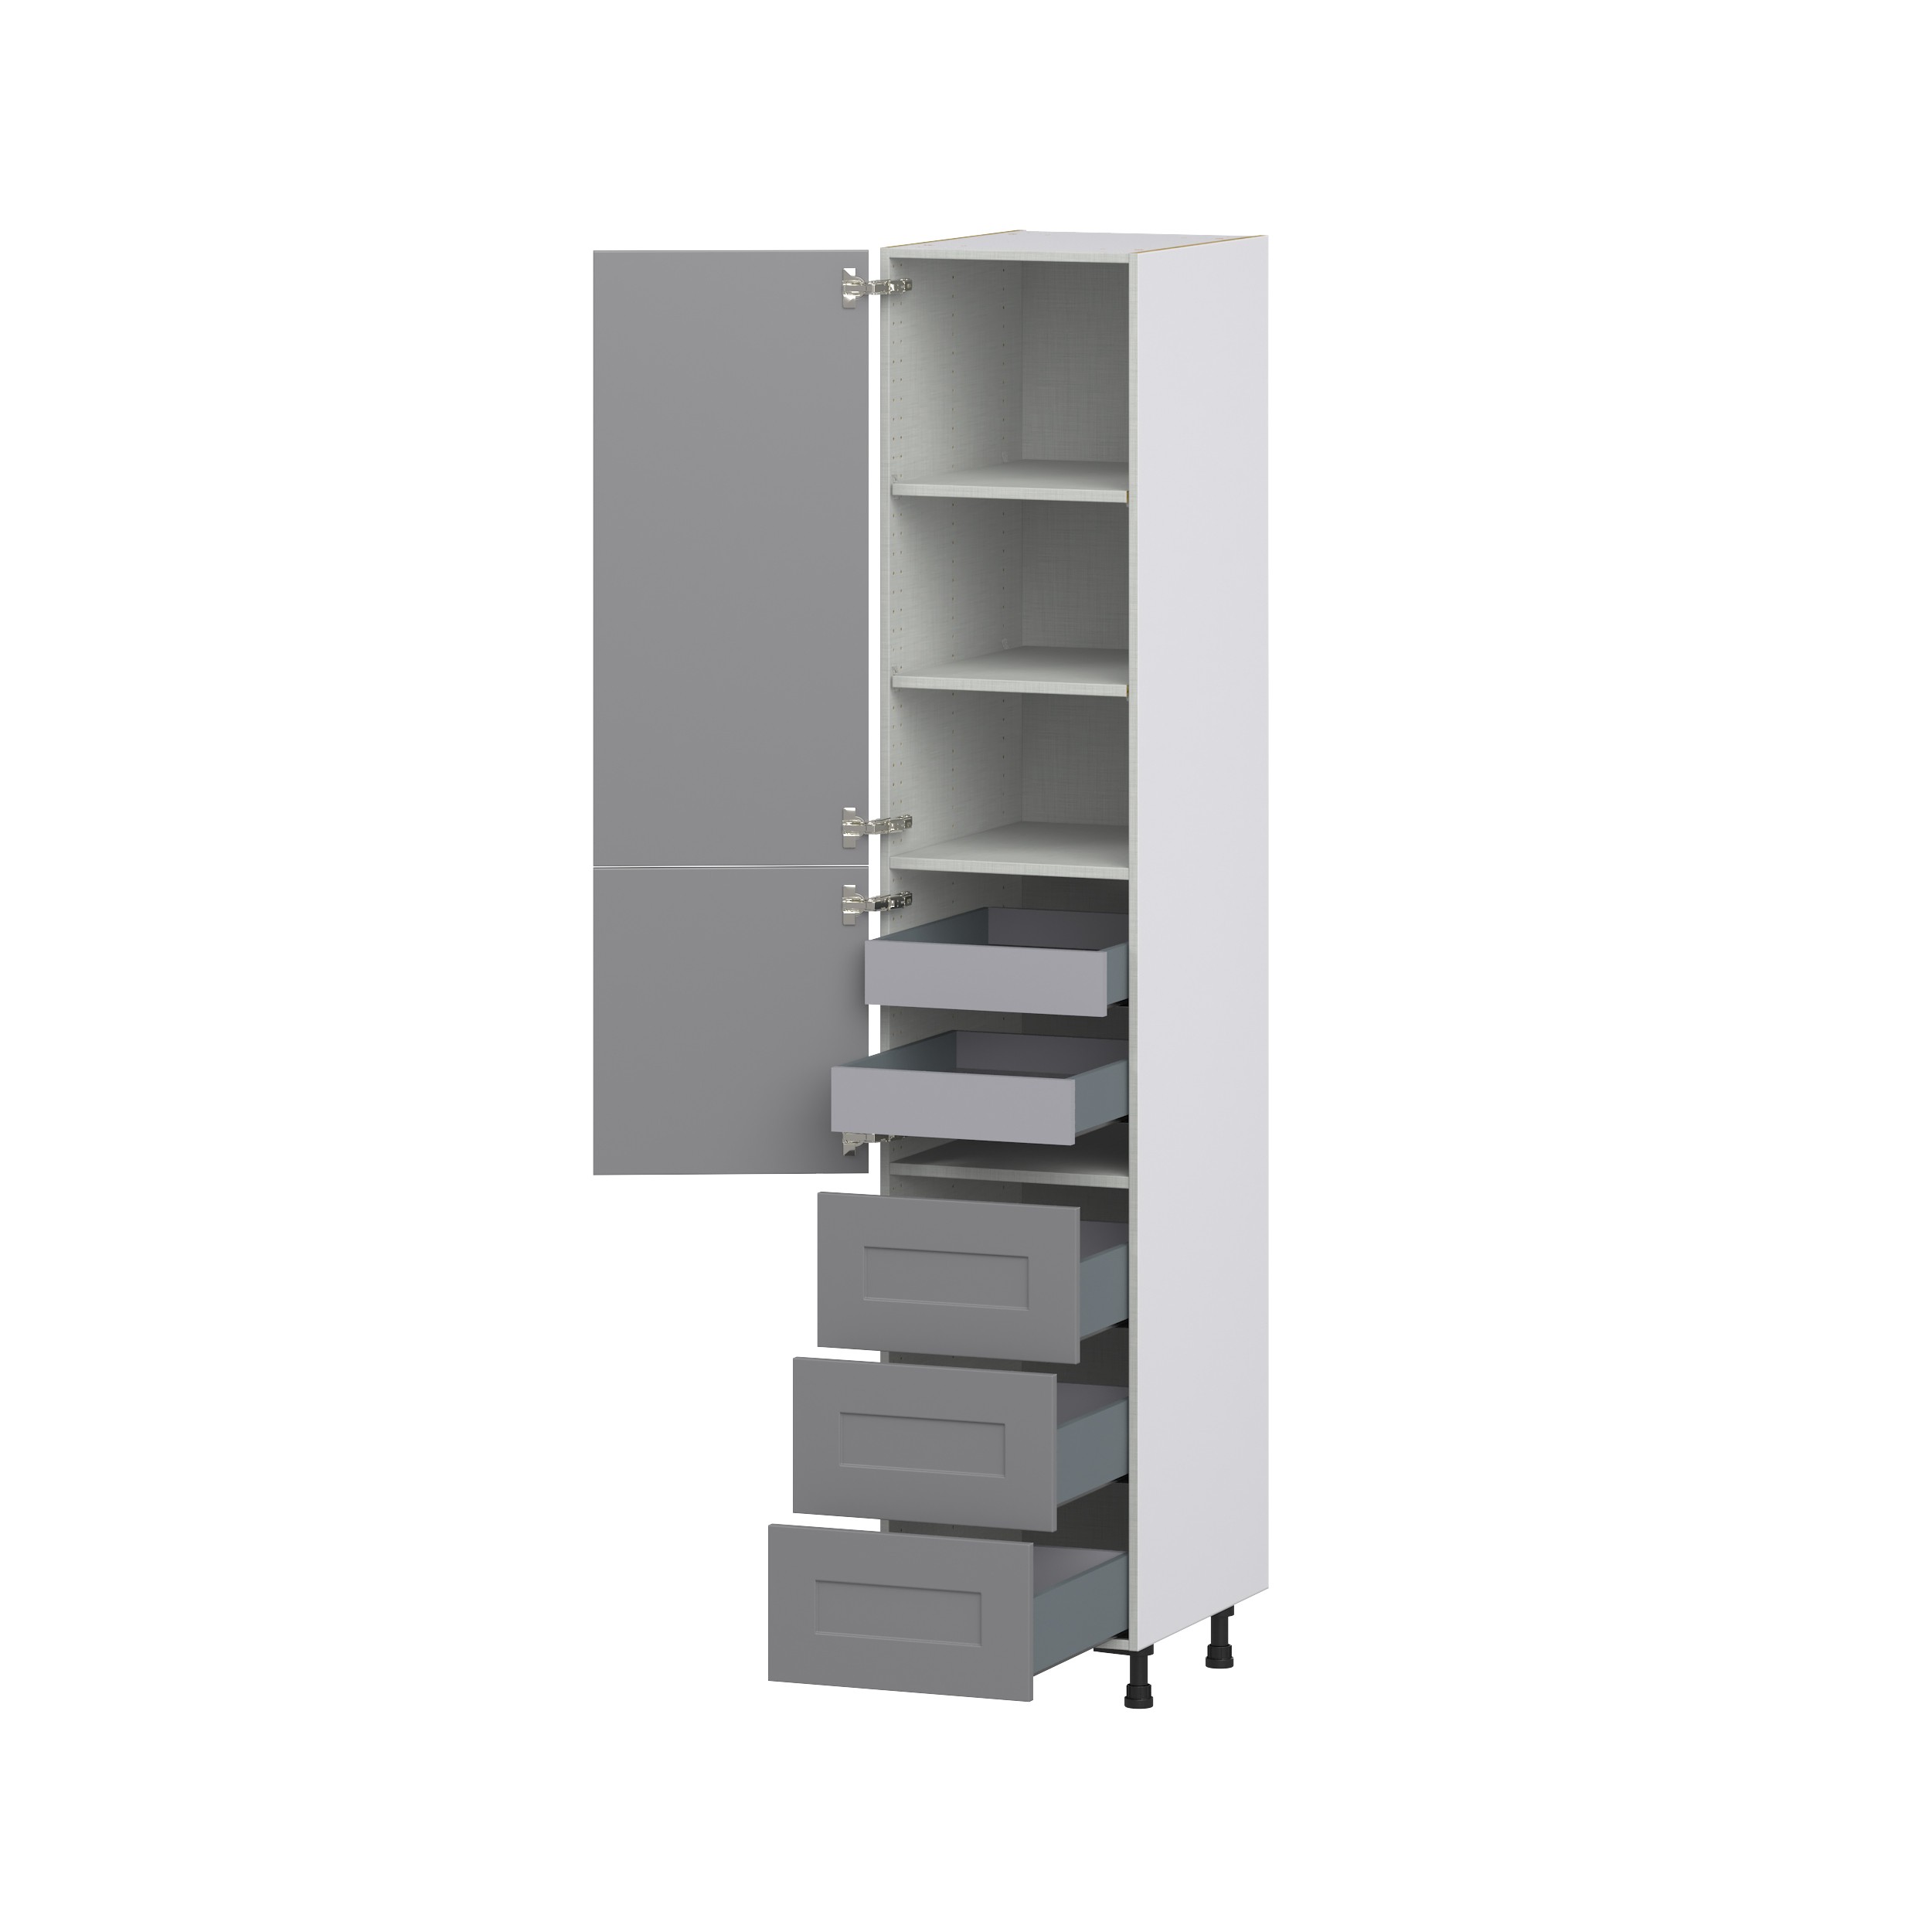 Willow Painted Slate Gray Shaker Assembled Pantry Cabinet 1 Doors with 3 Drawers and 2 Inner Drawers (18 in. W X 94.5 in. H X 24 in. D)